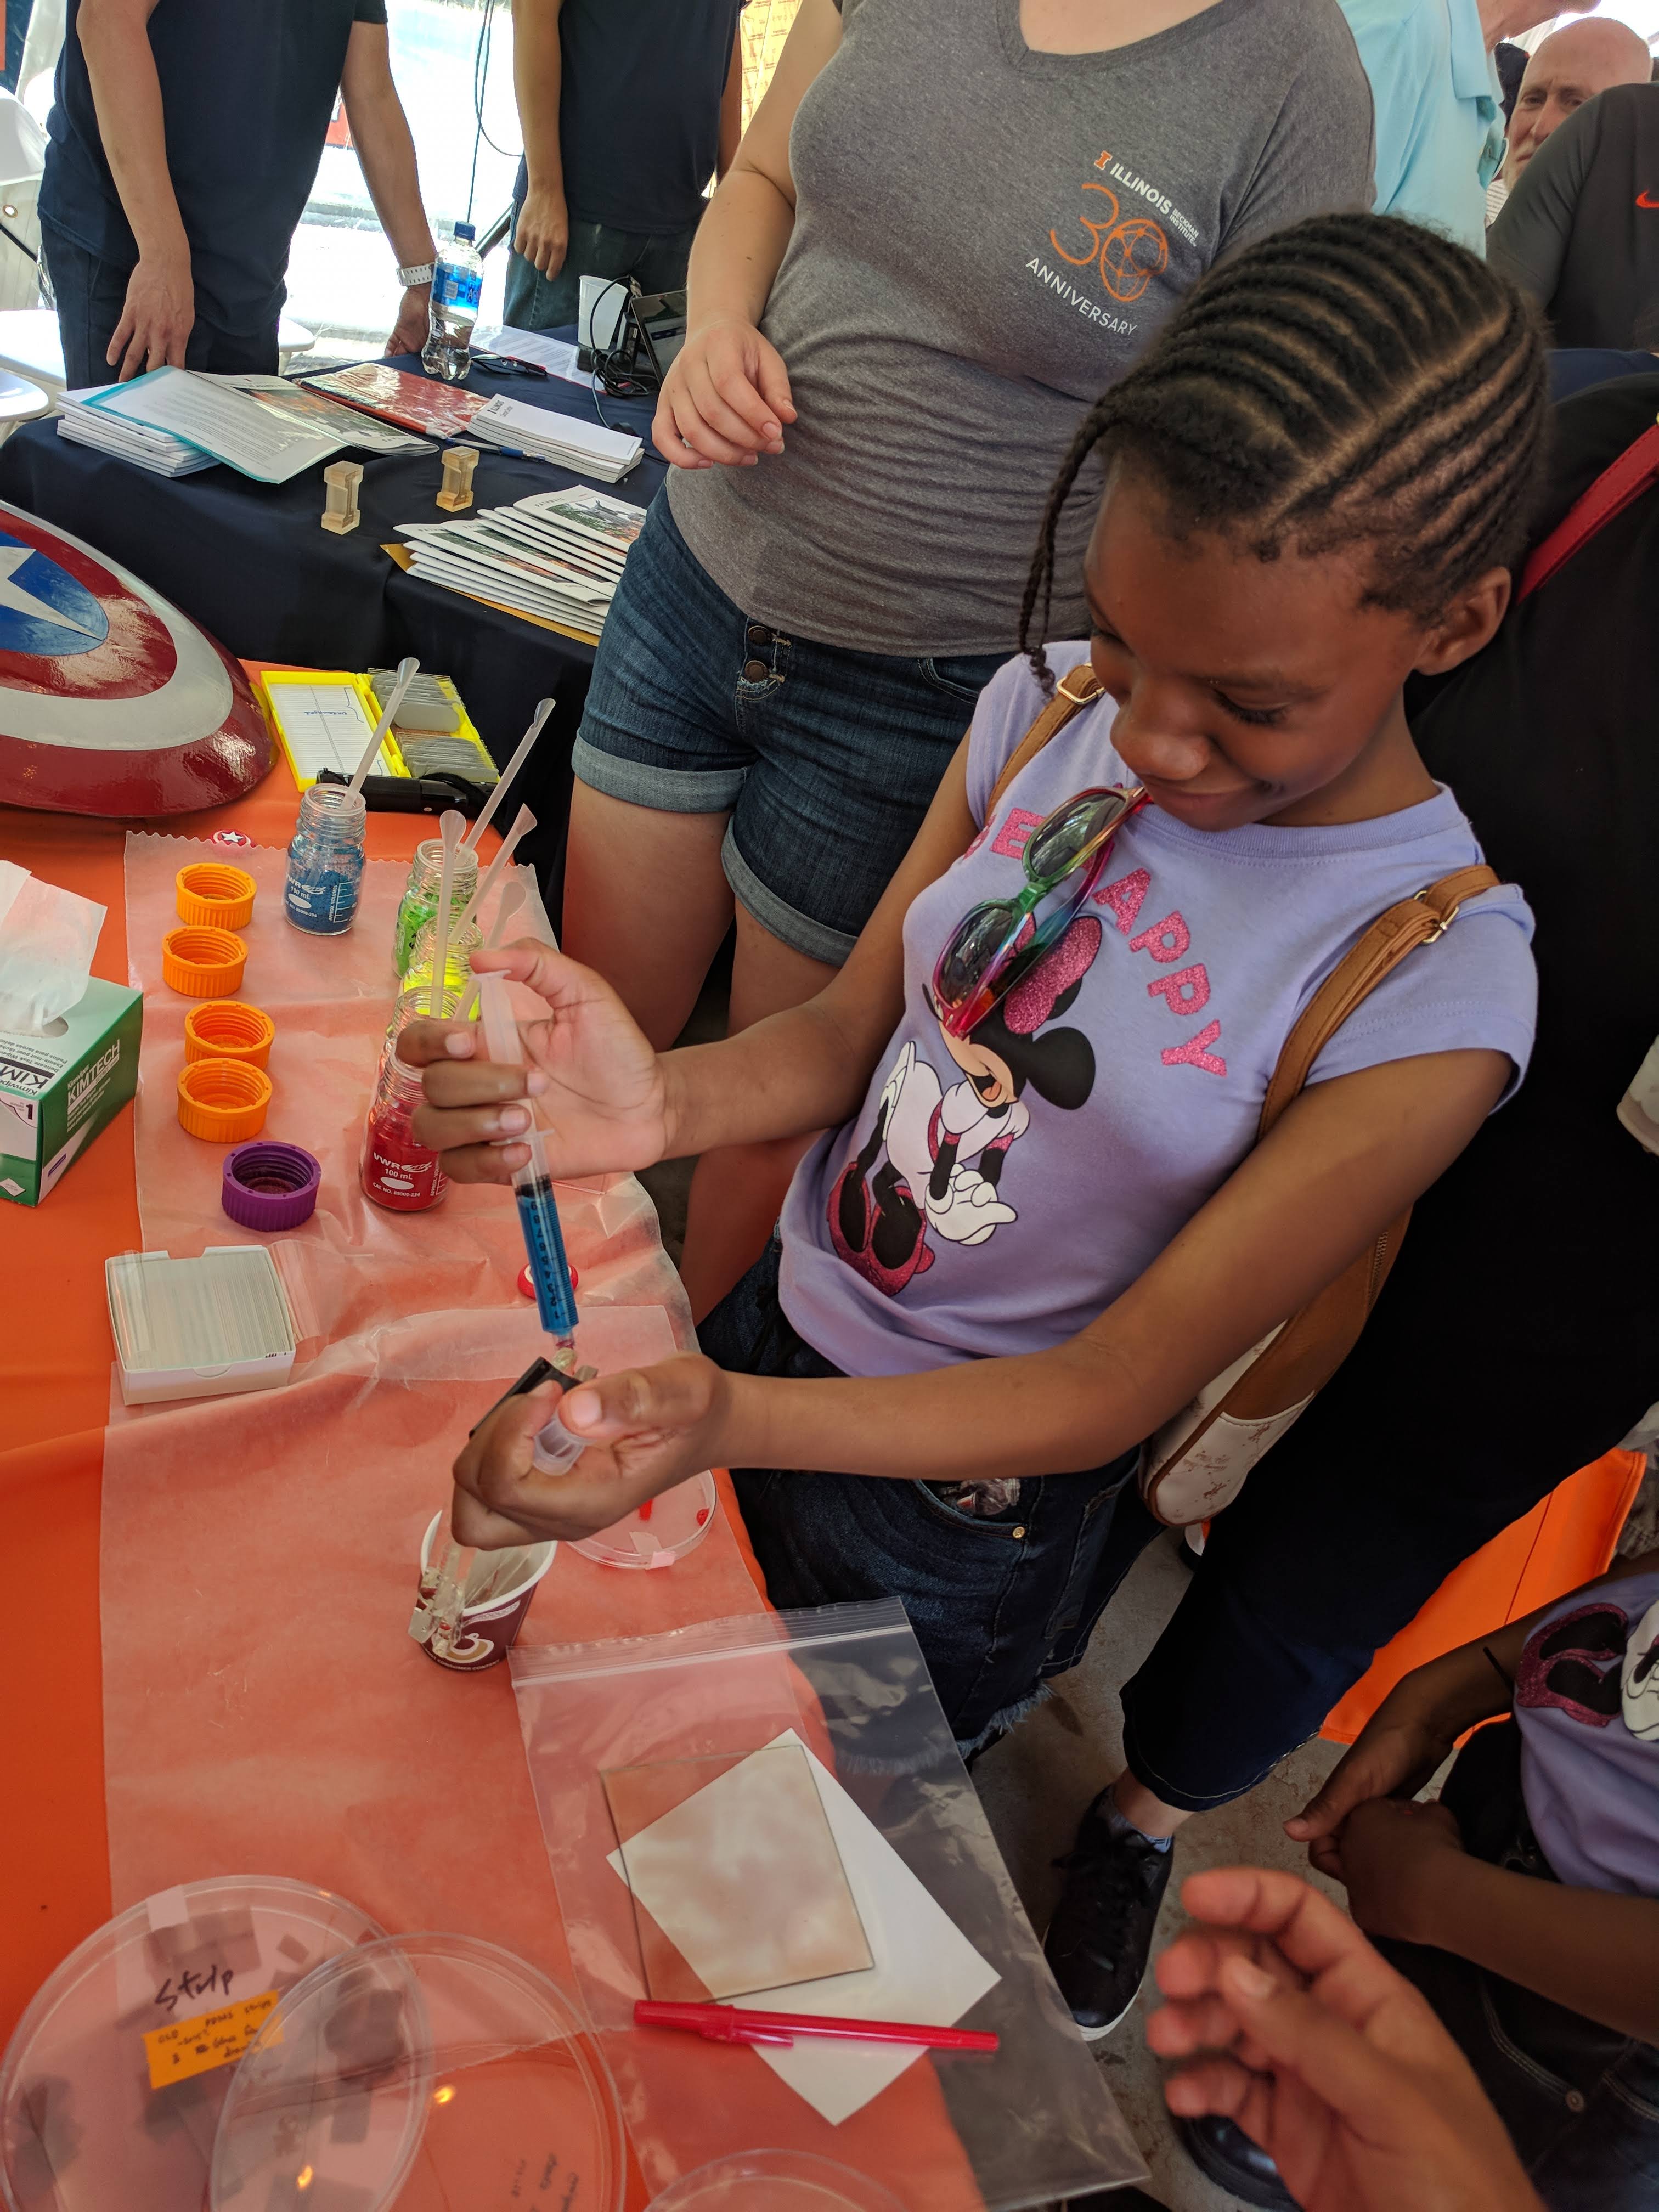 A girl who appears to be in elementary or middle school holds a syringe filled with blue liquid, participating in an interactive experiment with the AMS group. 